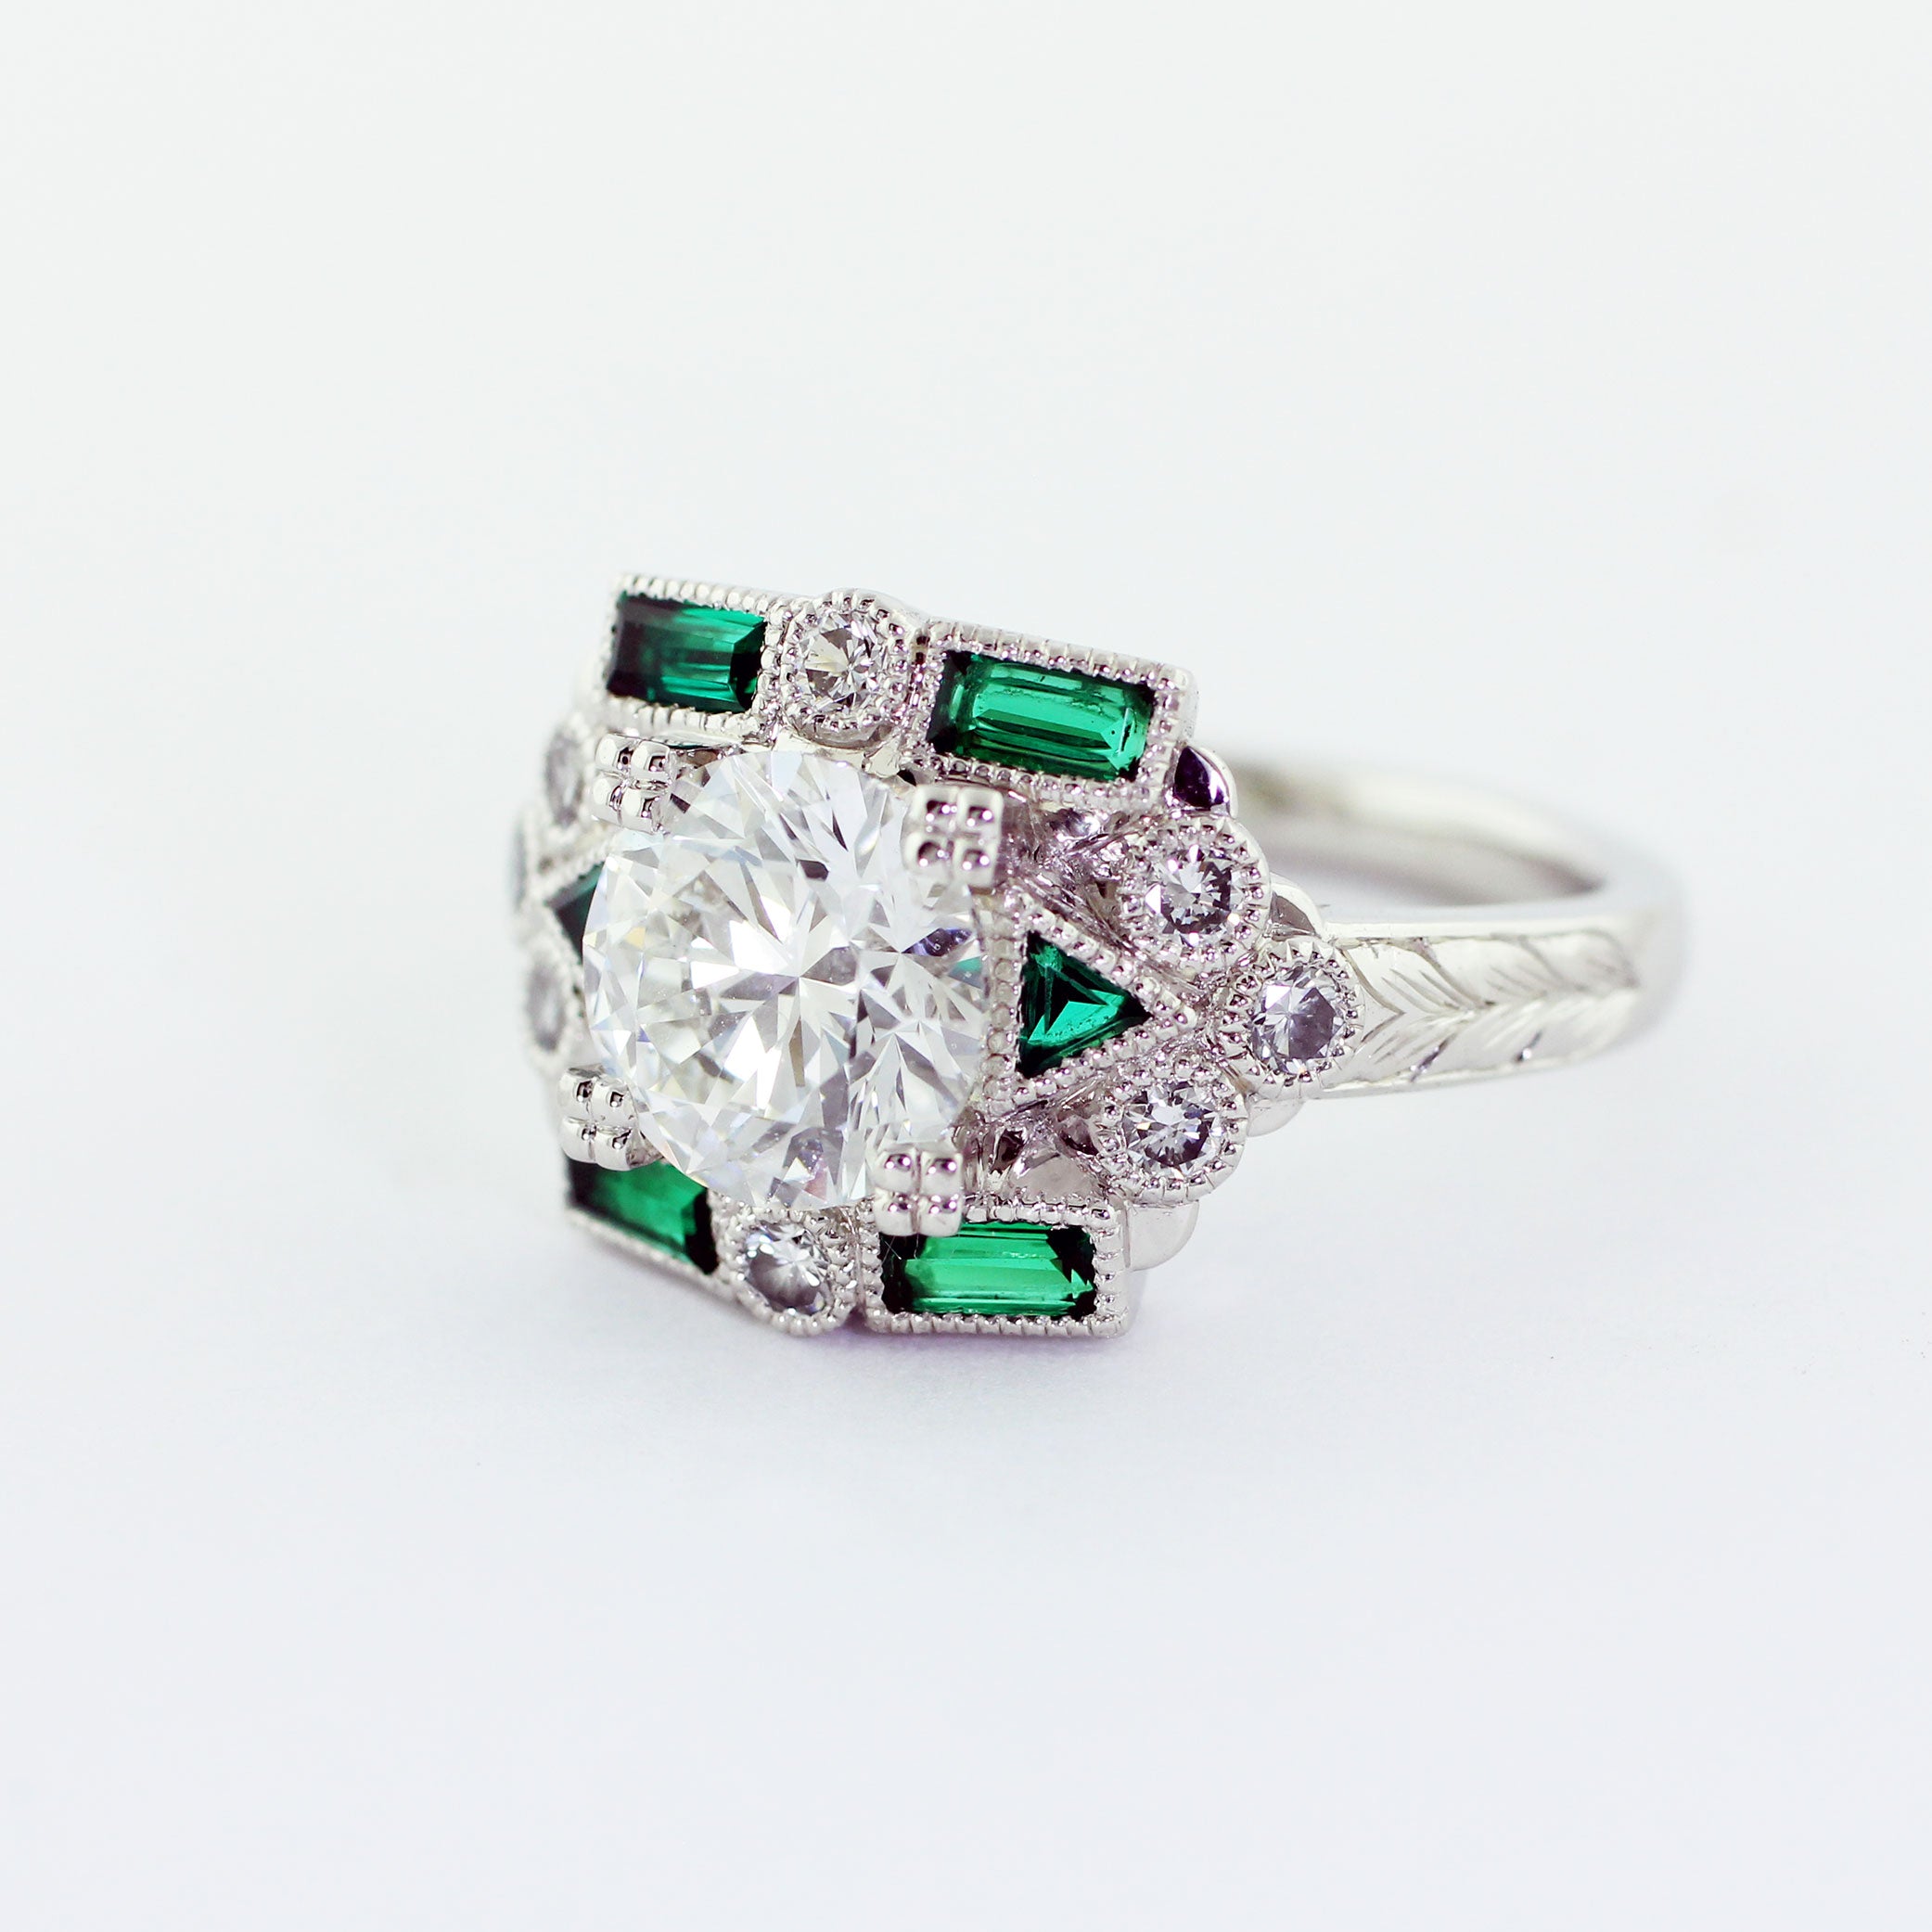 Custom Art Deco platinum ring with a prong-set 2.01ct round brilliant center diamond. The flat top shank features two triangular green emeralds, four baguette green emeralds, eight 2.2mm diamond melee, milgrain detailing, and an engraved wheat leaf pattern, lending a touch of vintage charm.